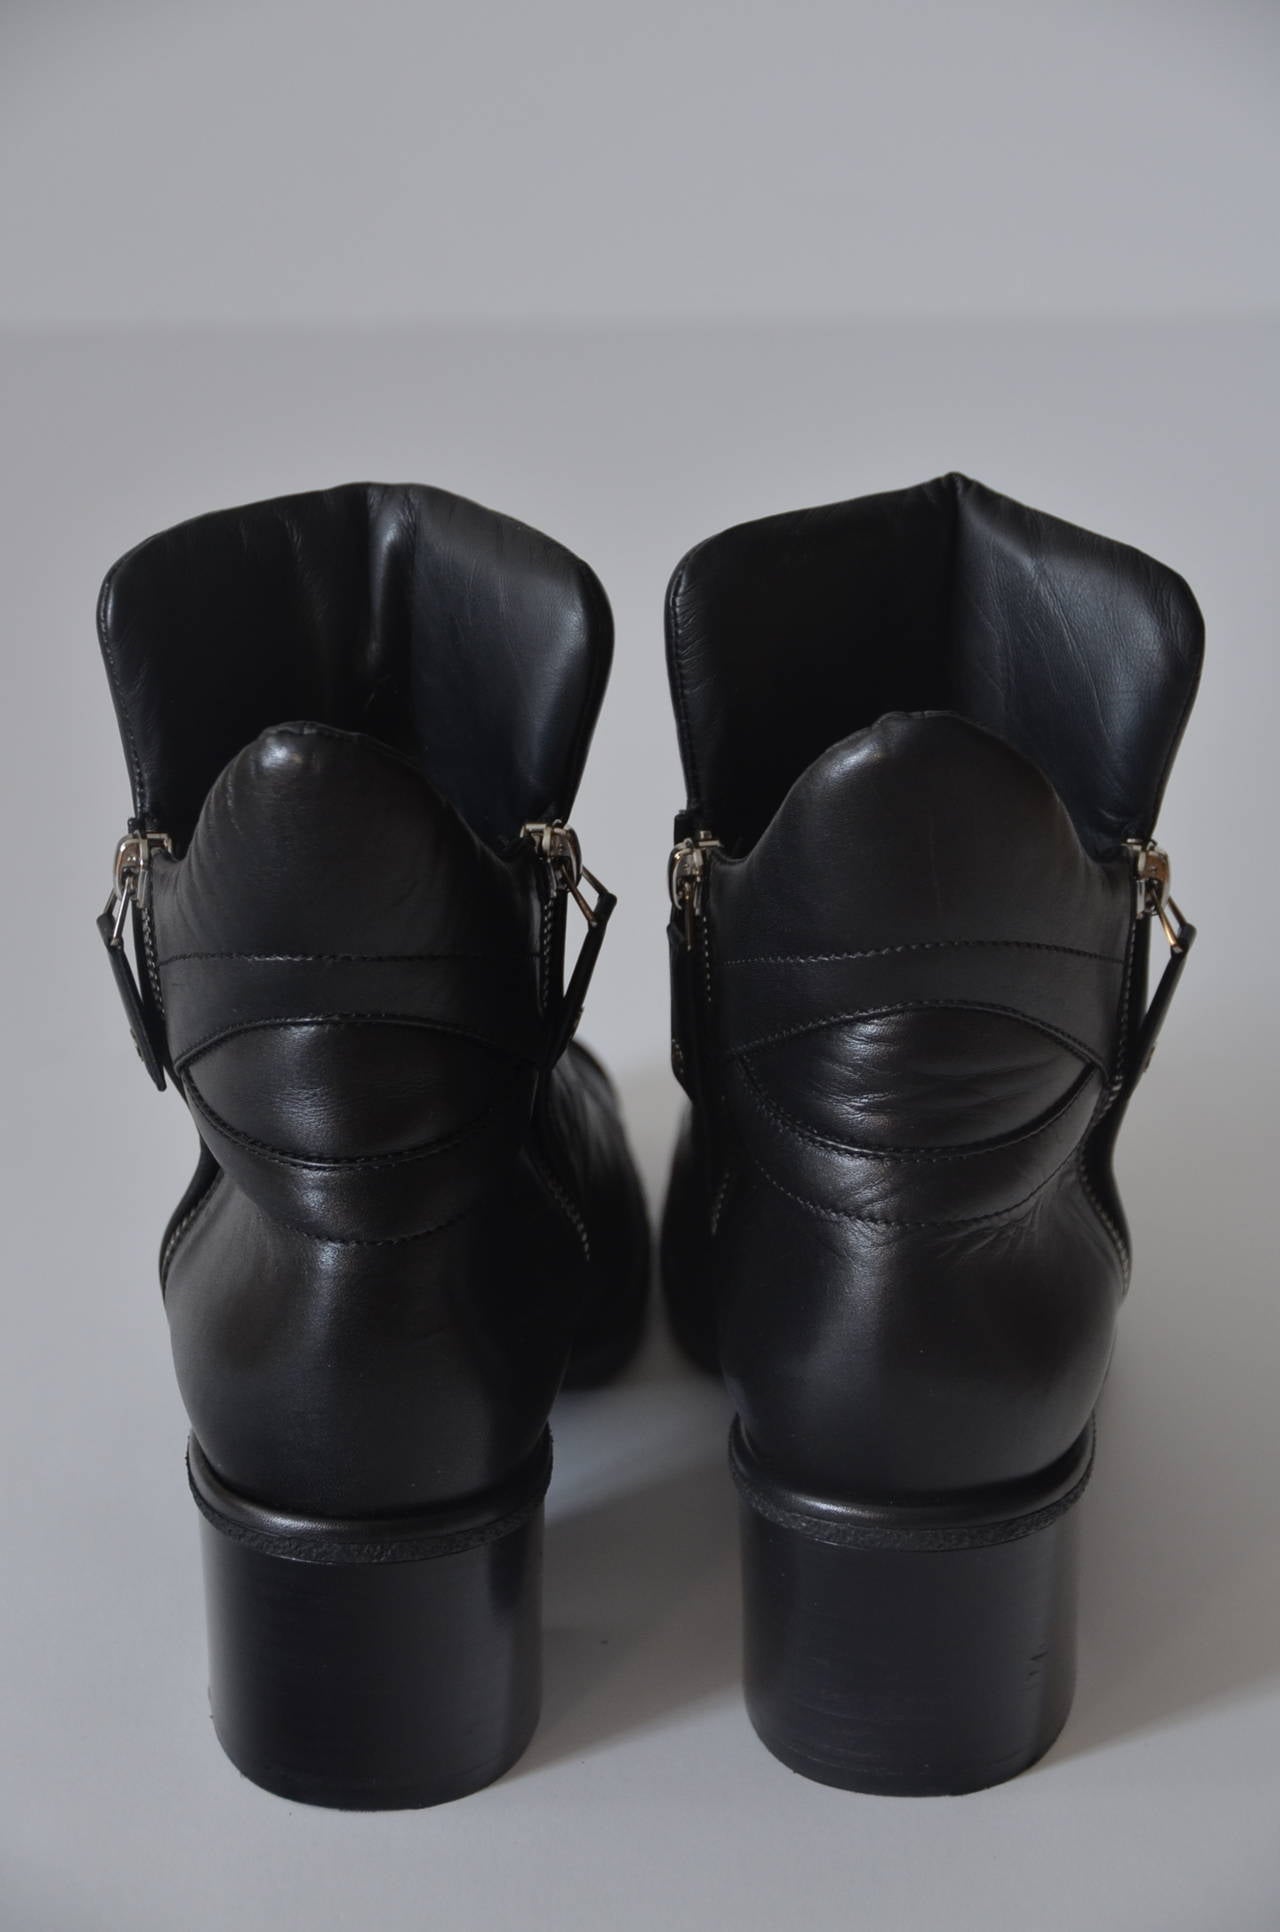 Chanel Lambskin Quilted Boots 39.5 2